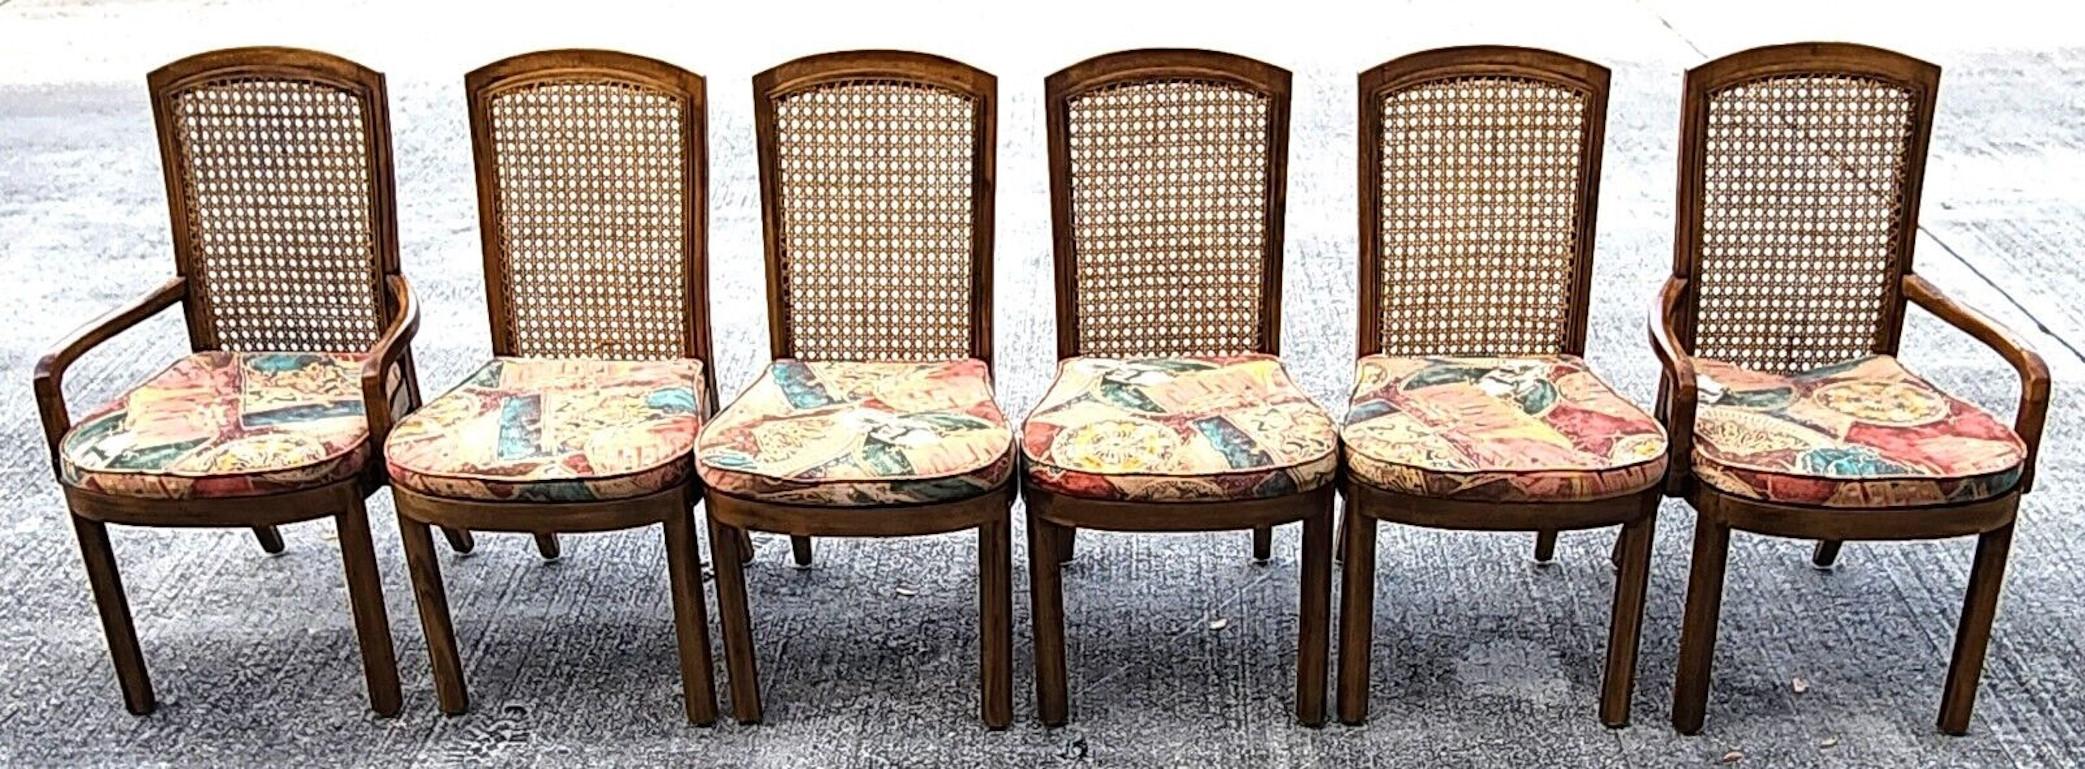 For FULL item description click on CONTINUE READING at the bottom of this page.

Offering One Of Our Recent Palm Beach Estate Fine Furniture Acquisitions Of A
Set of 6 Vintage Drexel Accolade Dining Chairs
Set includes 2 arm and 4 side chairs. 

We